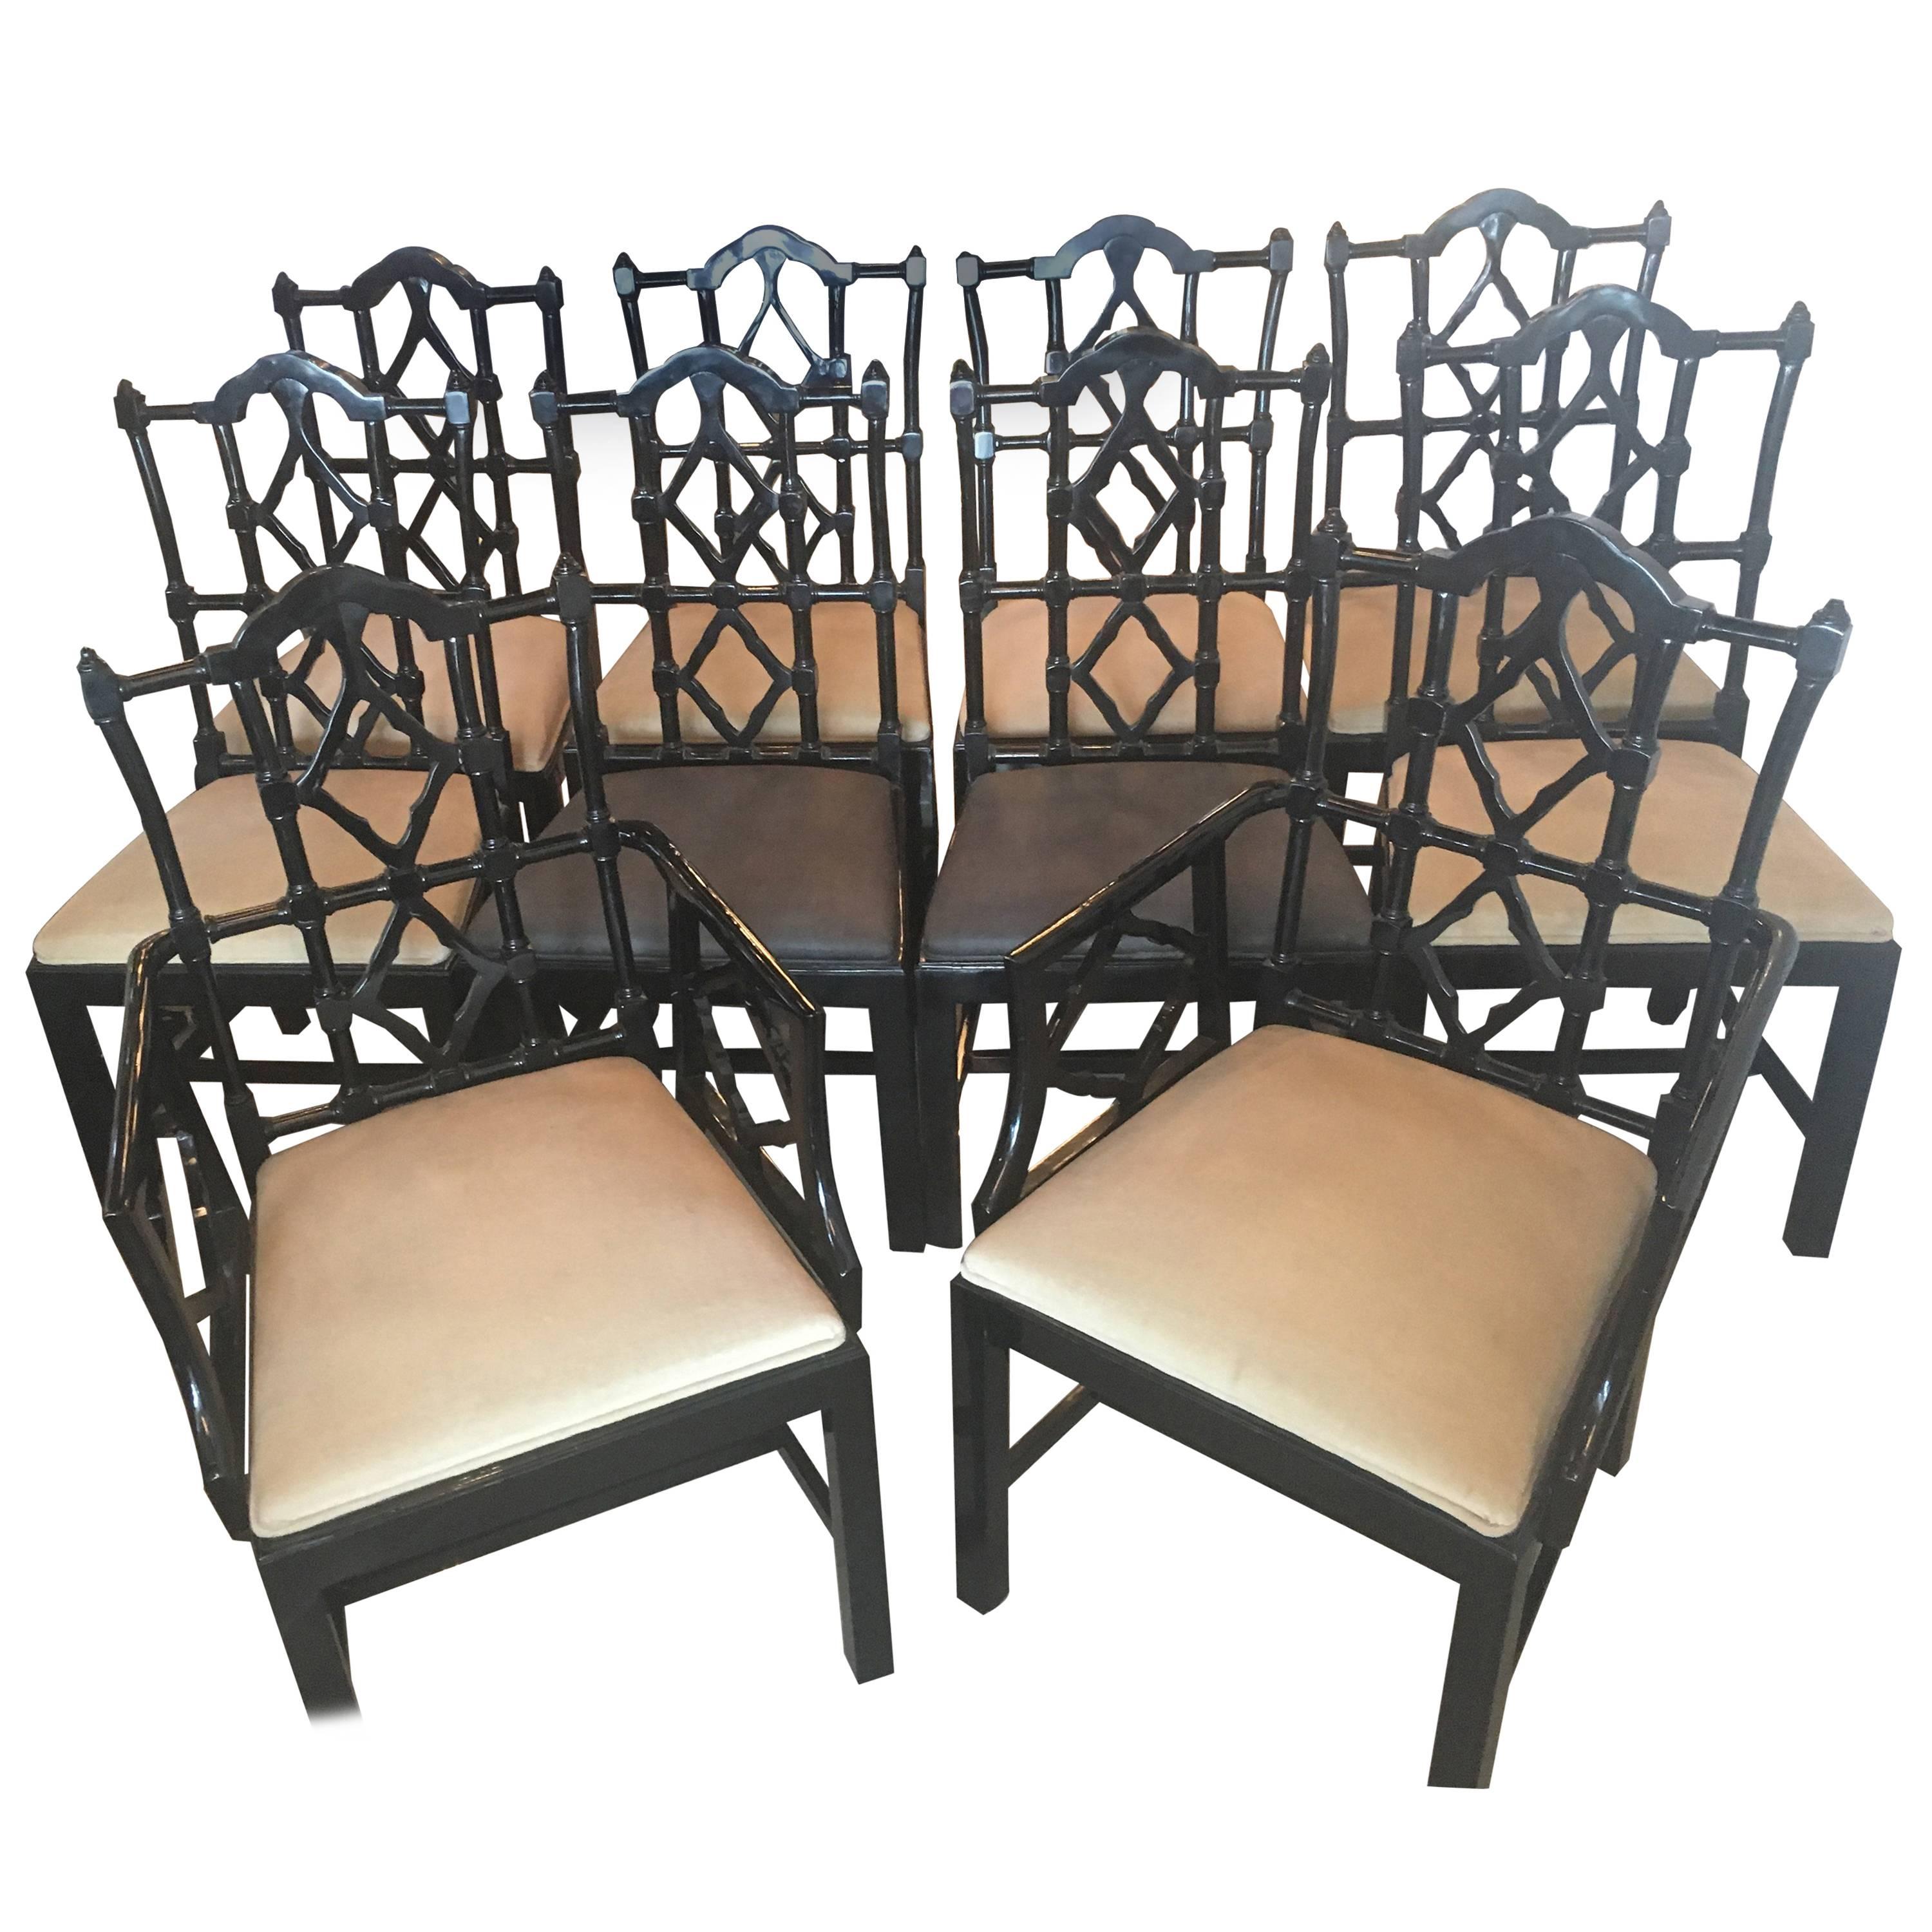 Set of Ten Chinese Chippendale Fretwork Dining Chairs Made in Spain Chinoiserie